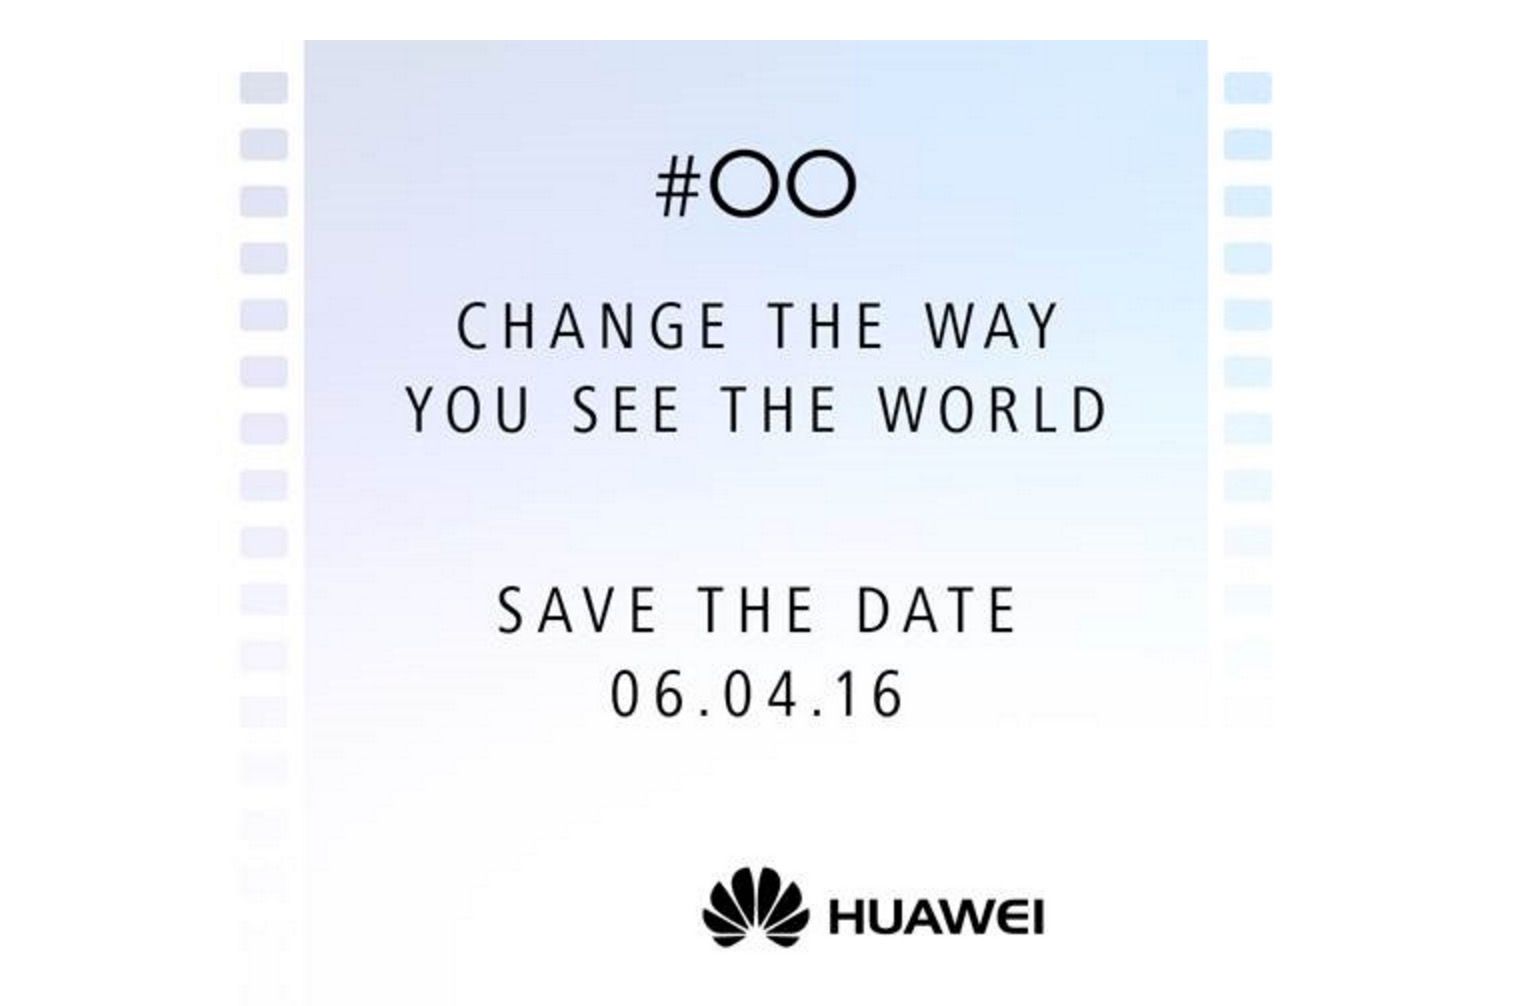 huawei p9 event confirmed for april with save the date invite image 1